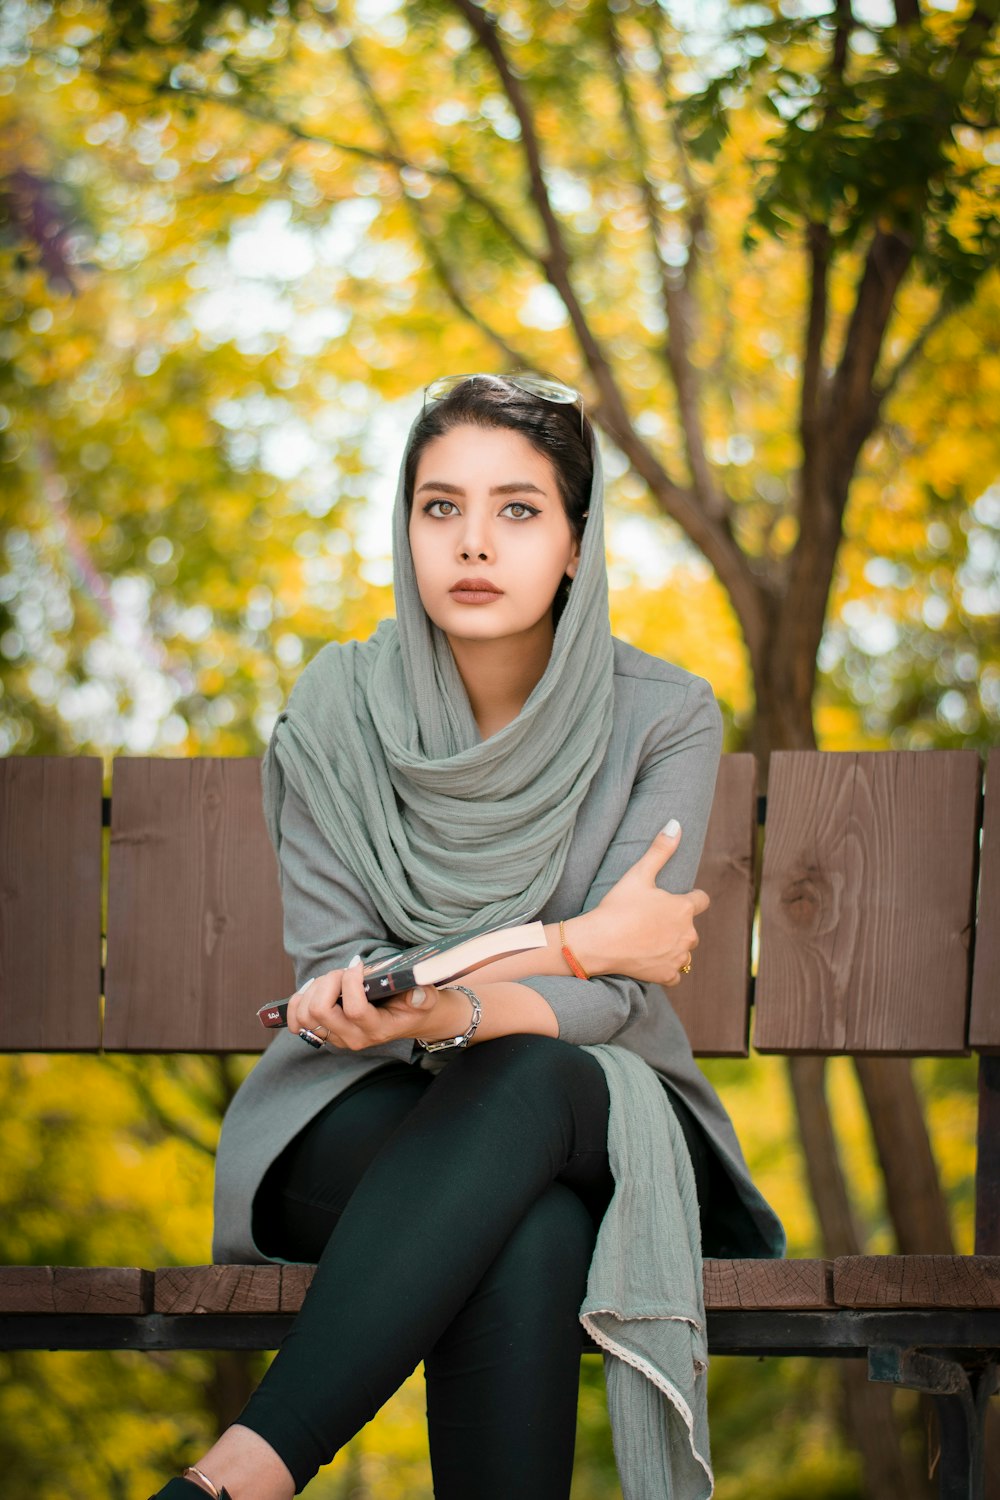 Download Hijab Woman Pictures Download Free Images On Unsplash